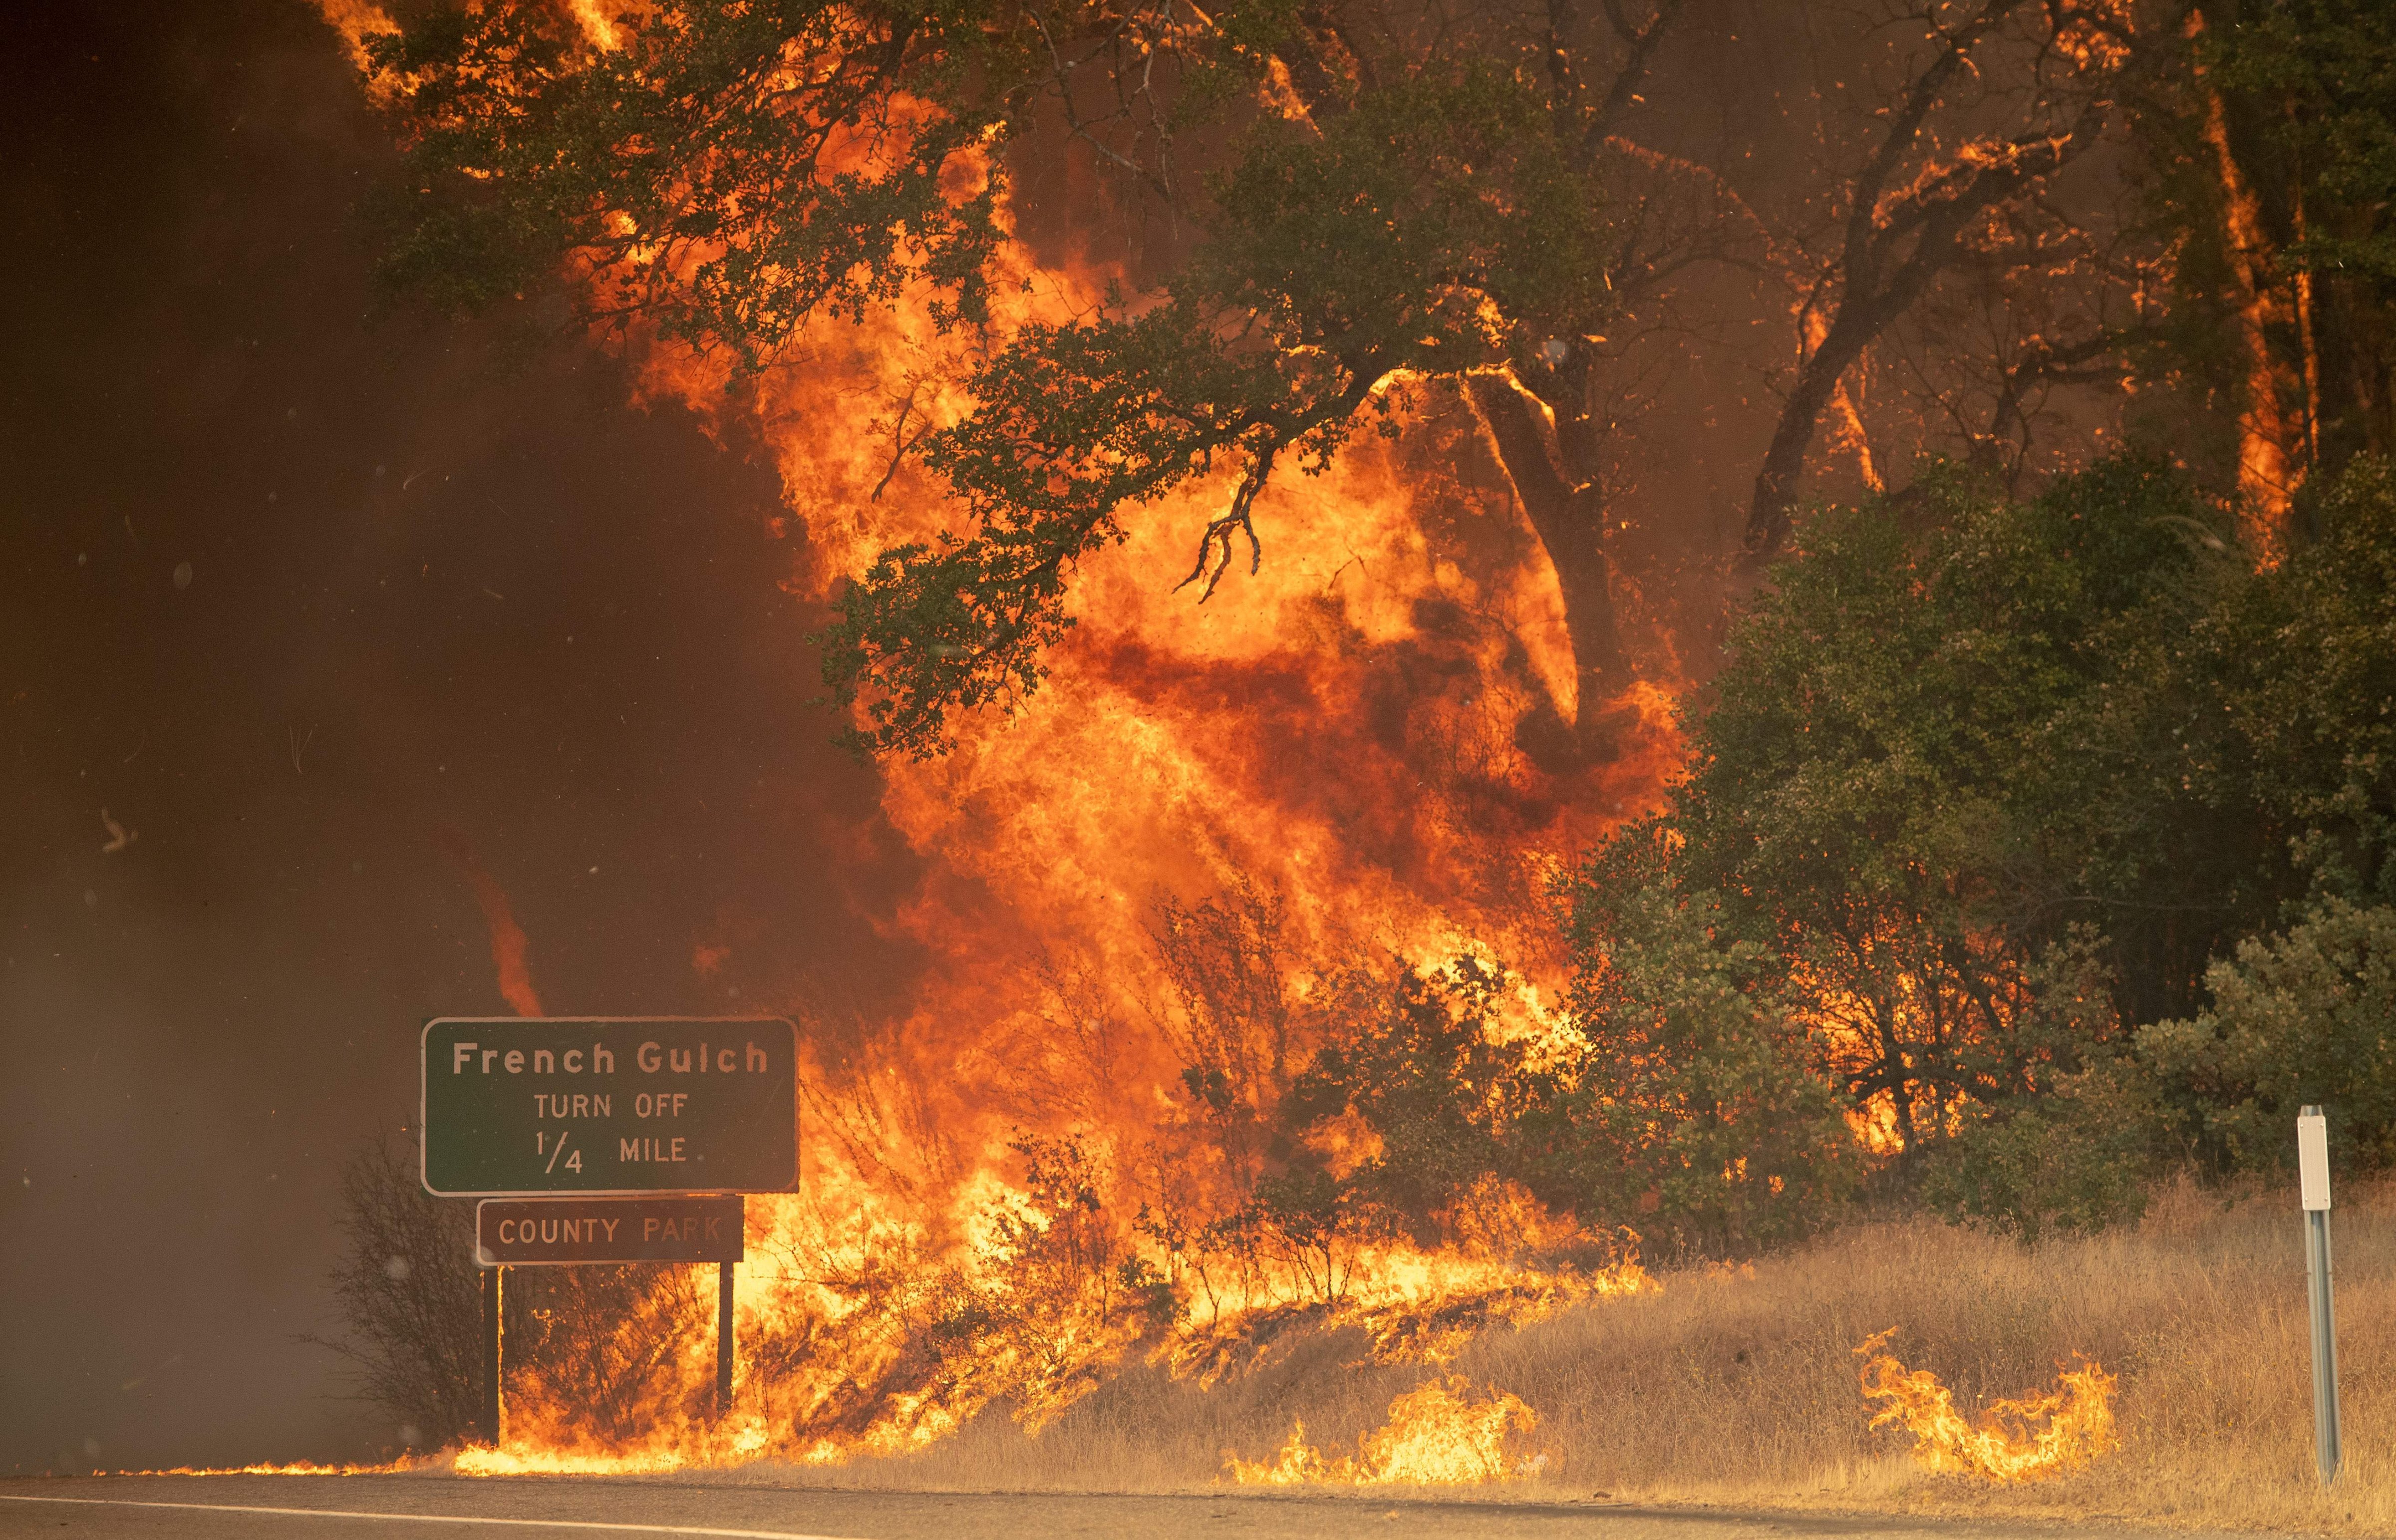 A power pole leans over a burned property as the sky turns a deep orange during the Carr fire near Redding, California on July 27, 2018. (JOSH EDELSON—AFP/Getty Images)